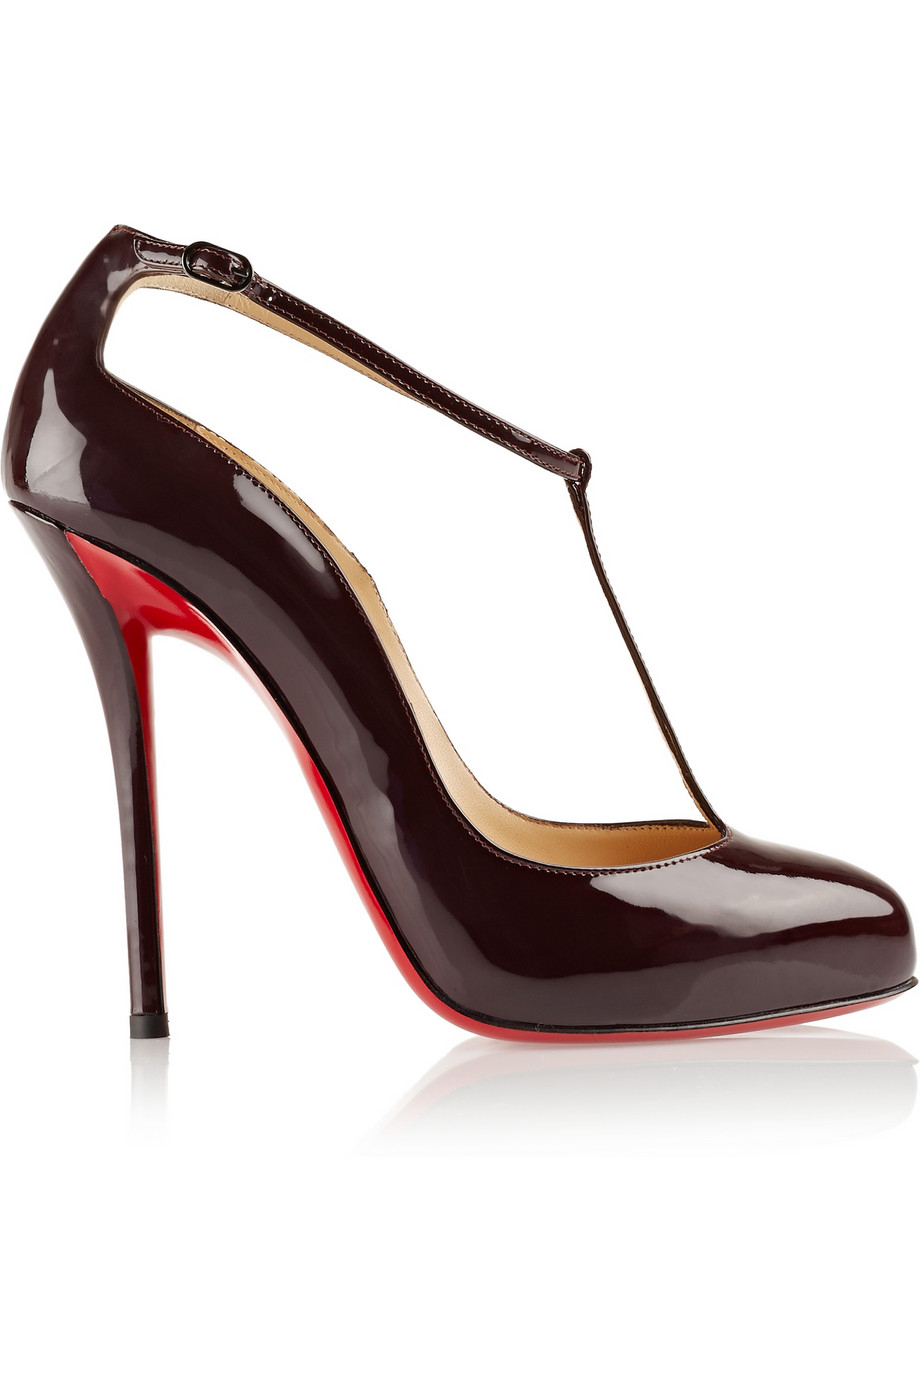 Christian Louboutin Ditassima 120 Patent-Leather T-Bar Pumps in Red - Lyst